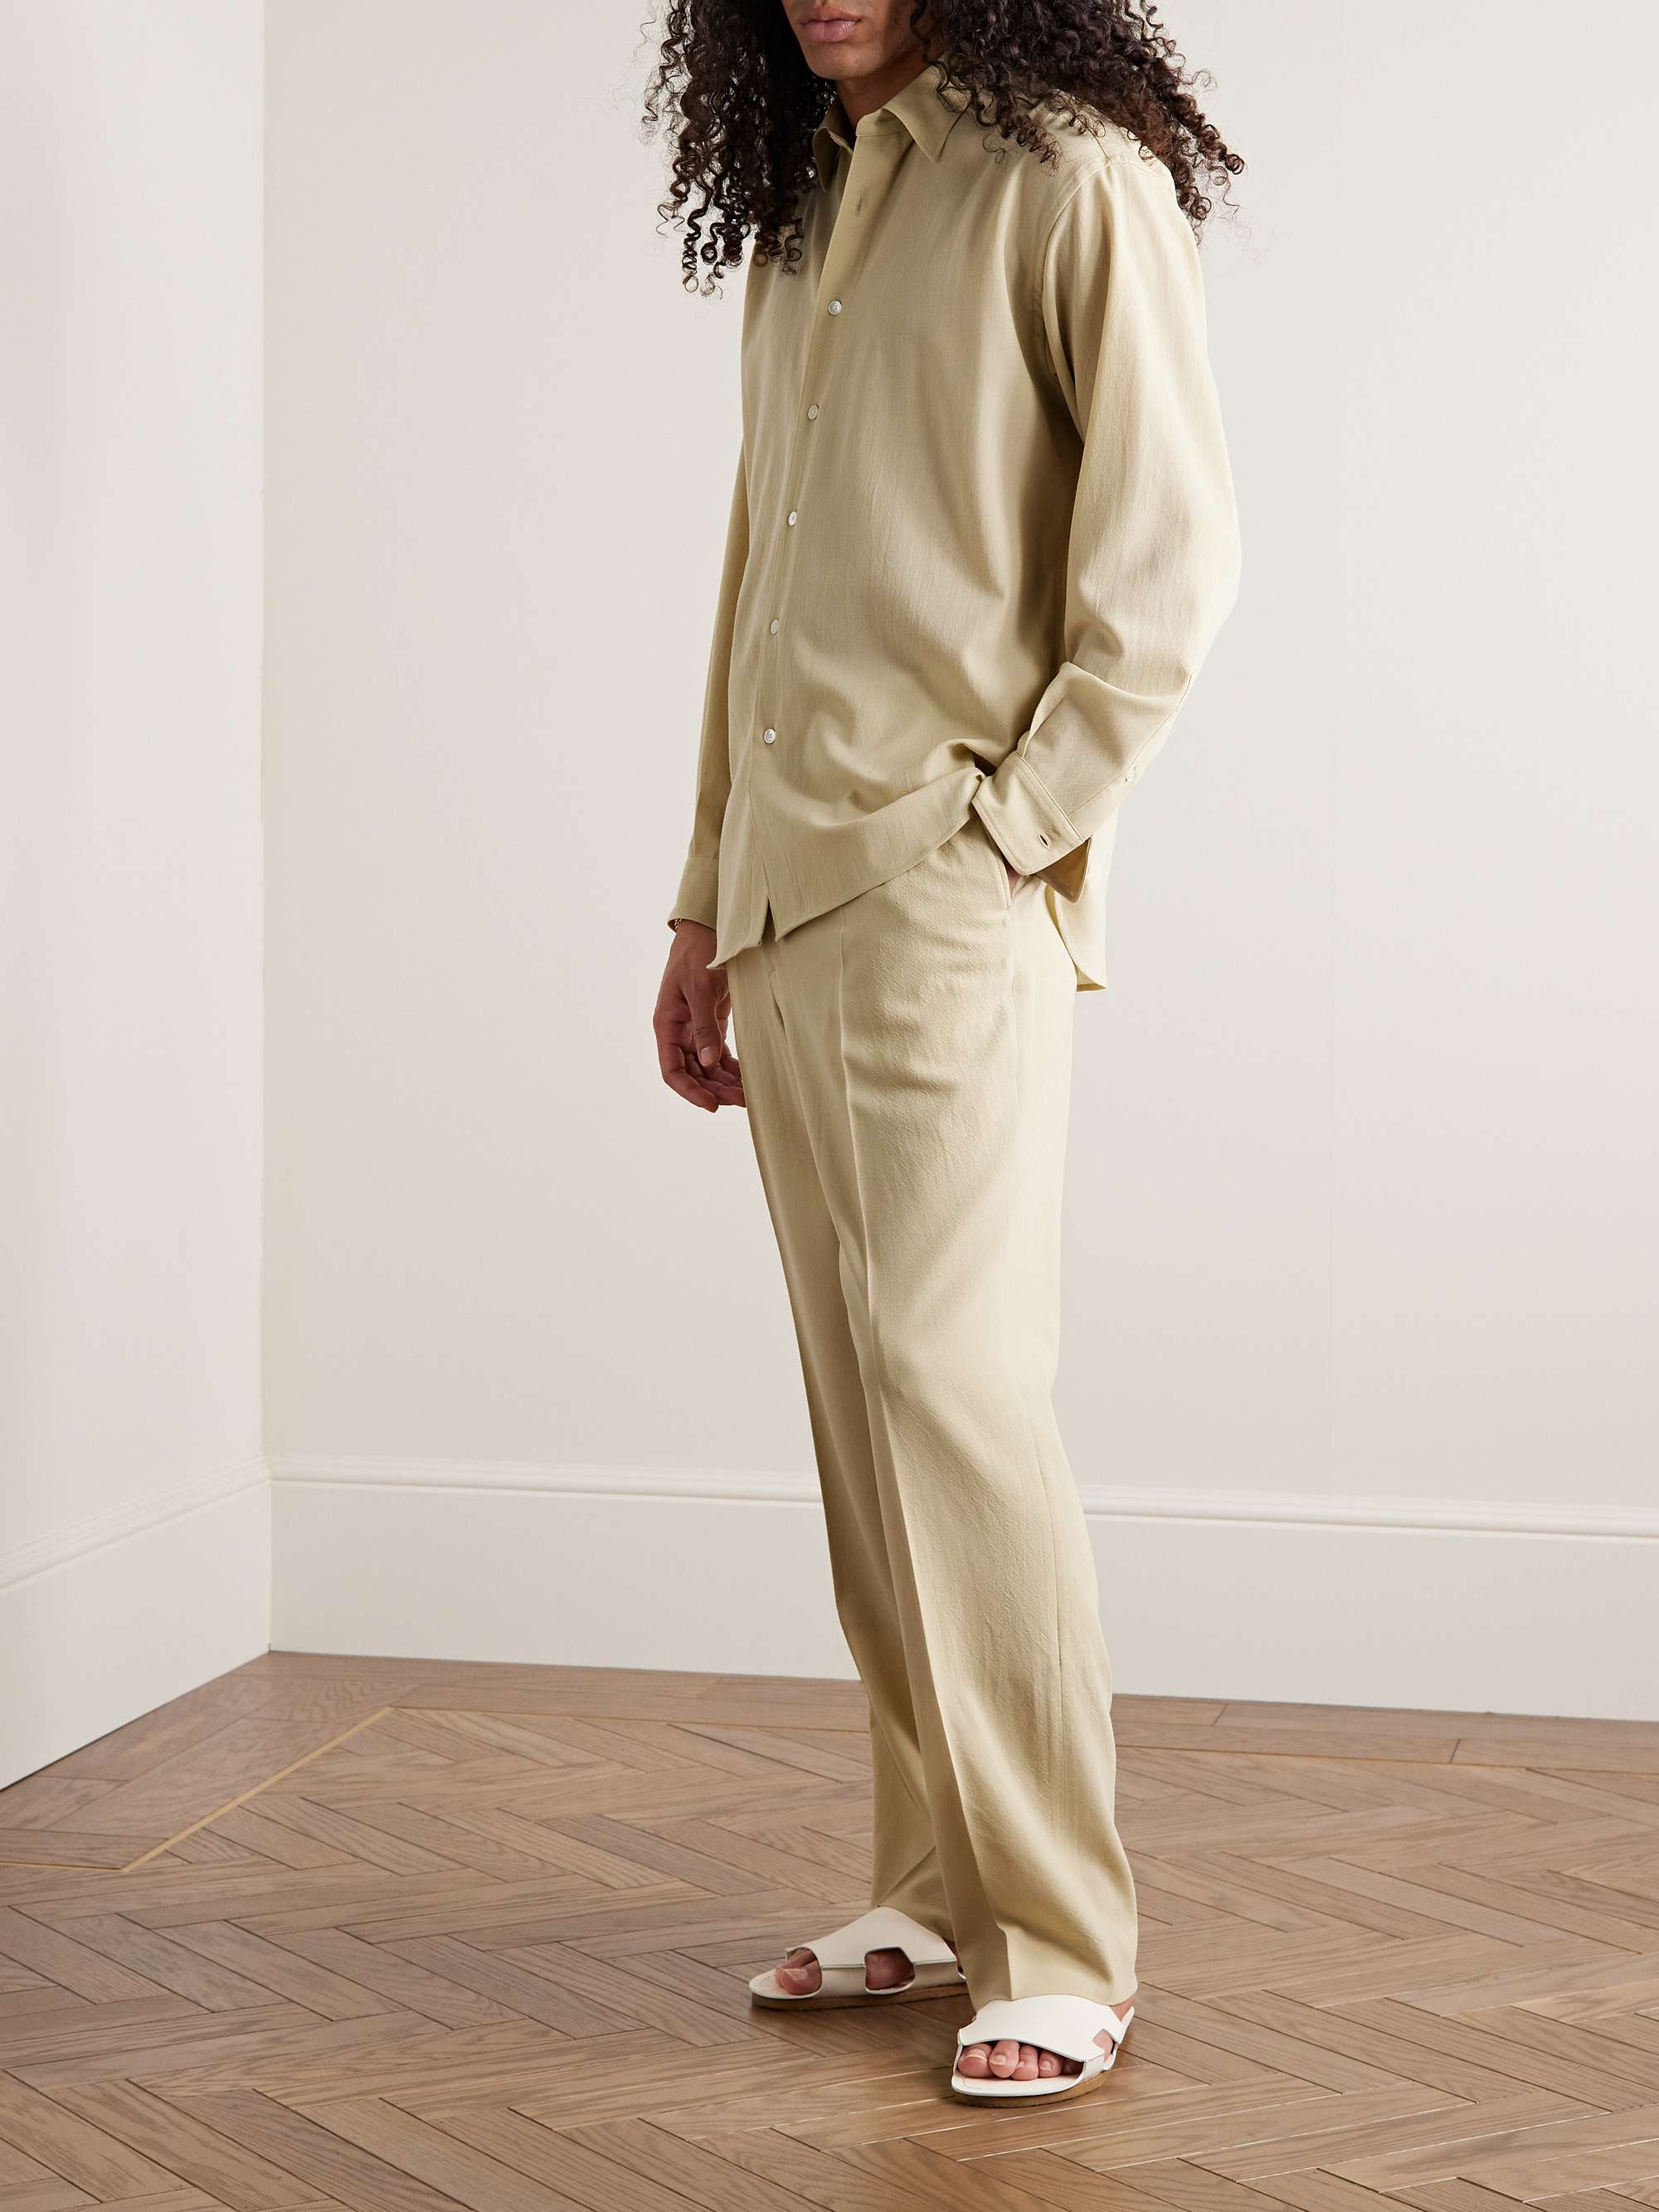 Pleated Straight-Leg Wool Suit Trousers